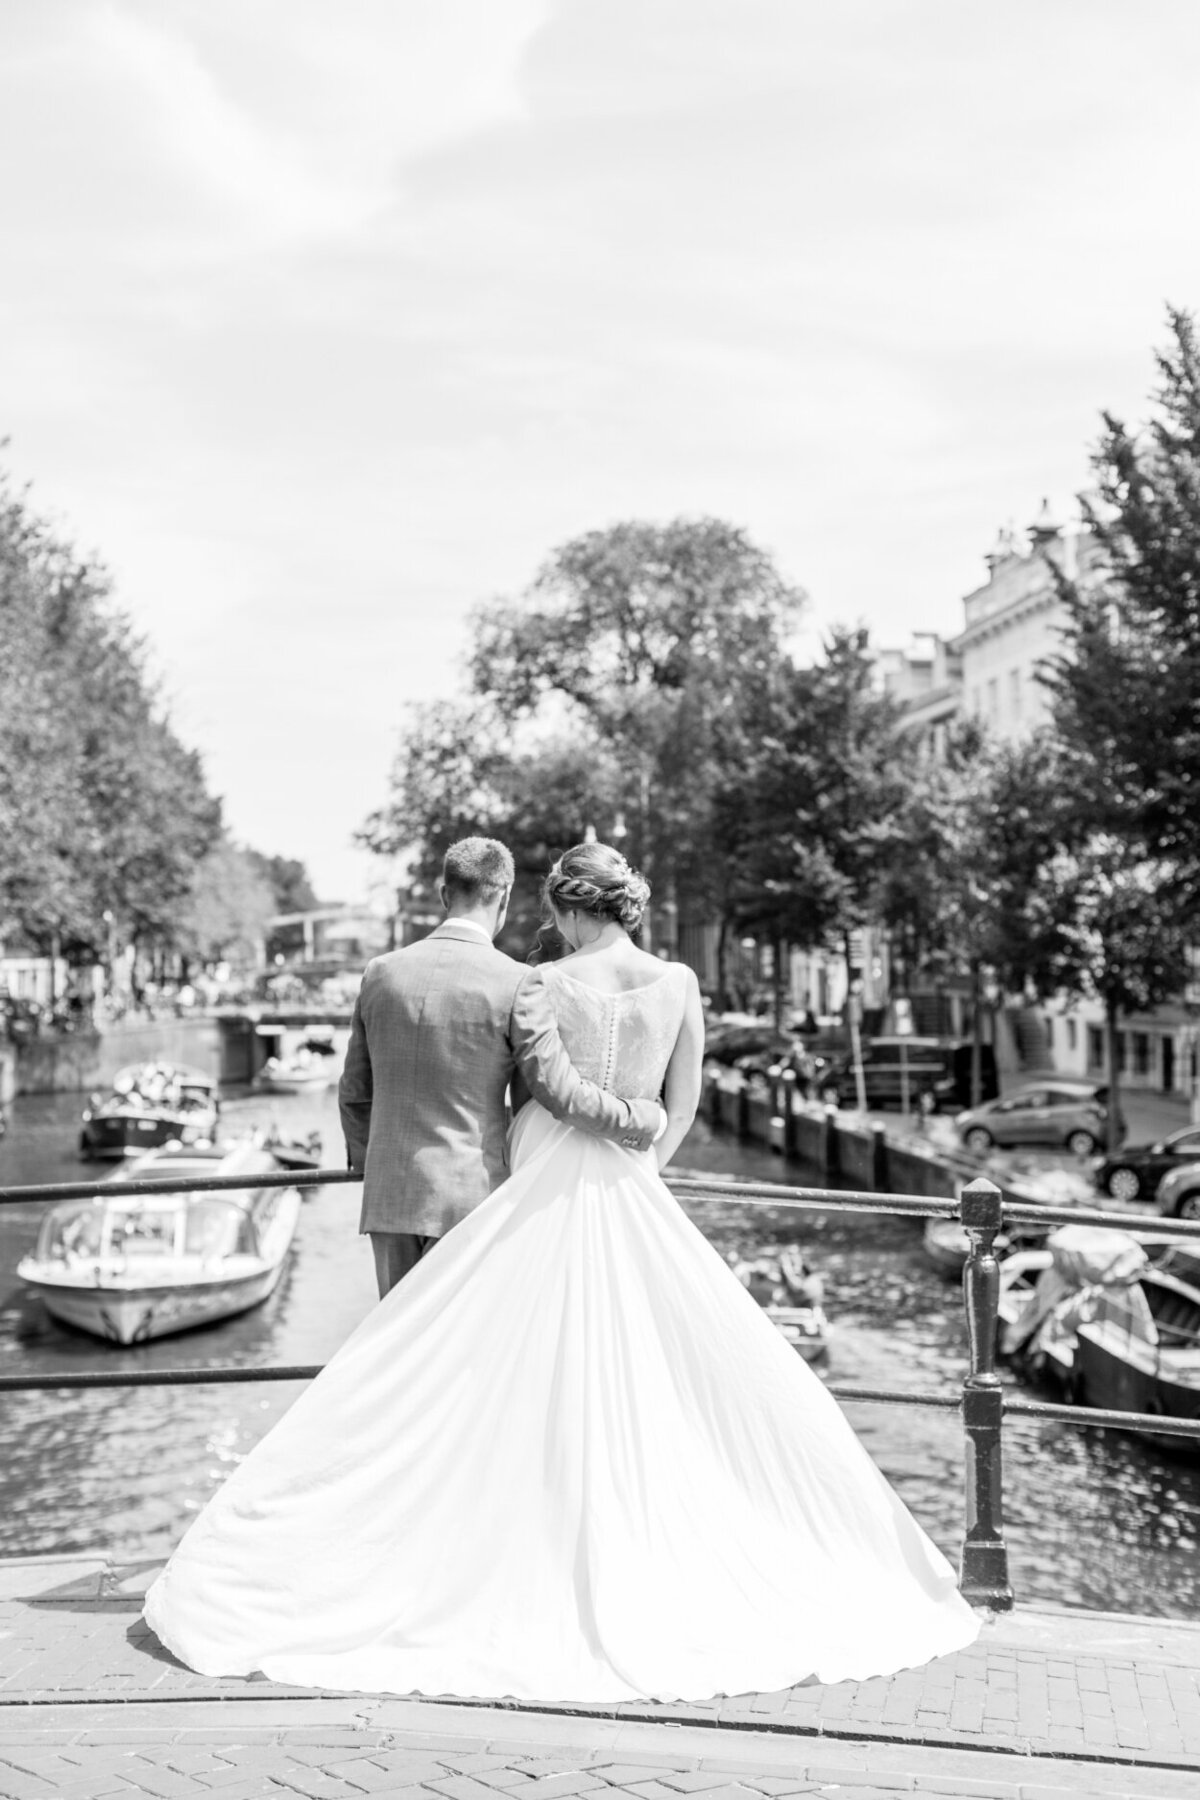 Black and white wedding portrait of an elopement in Amsterdam for a photo shoot organized by Lovely & Planned